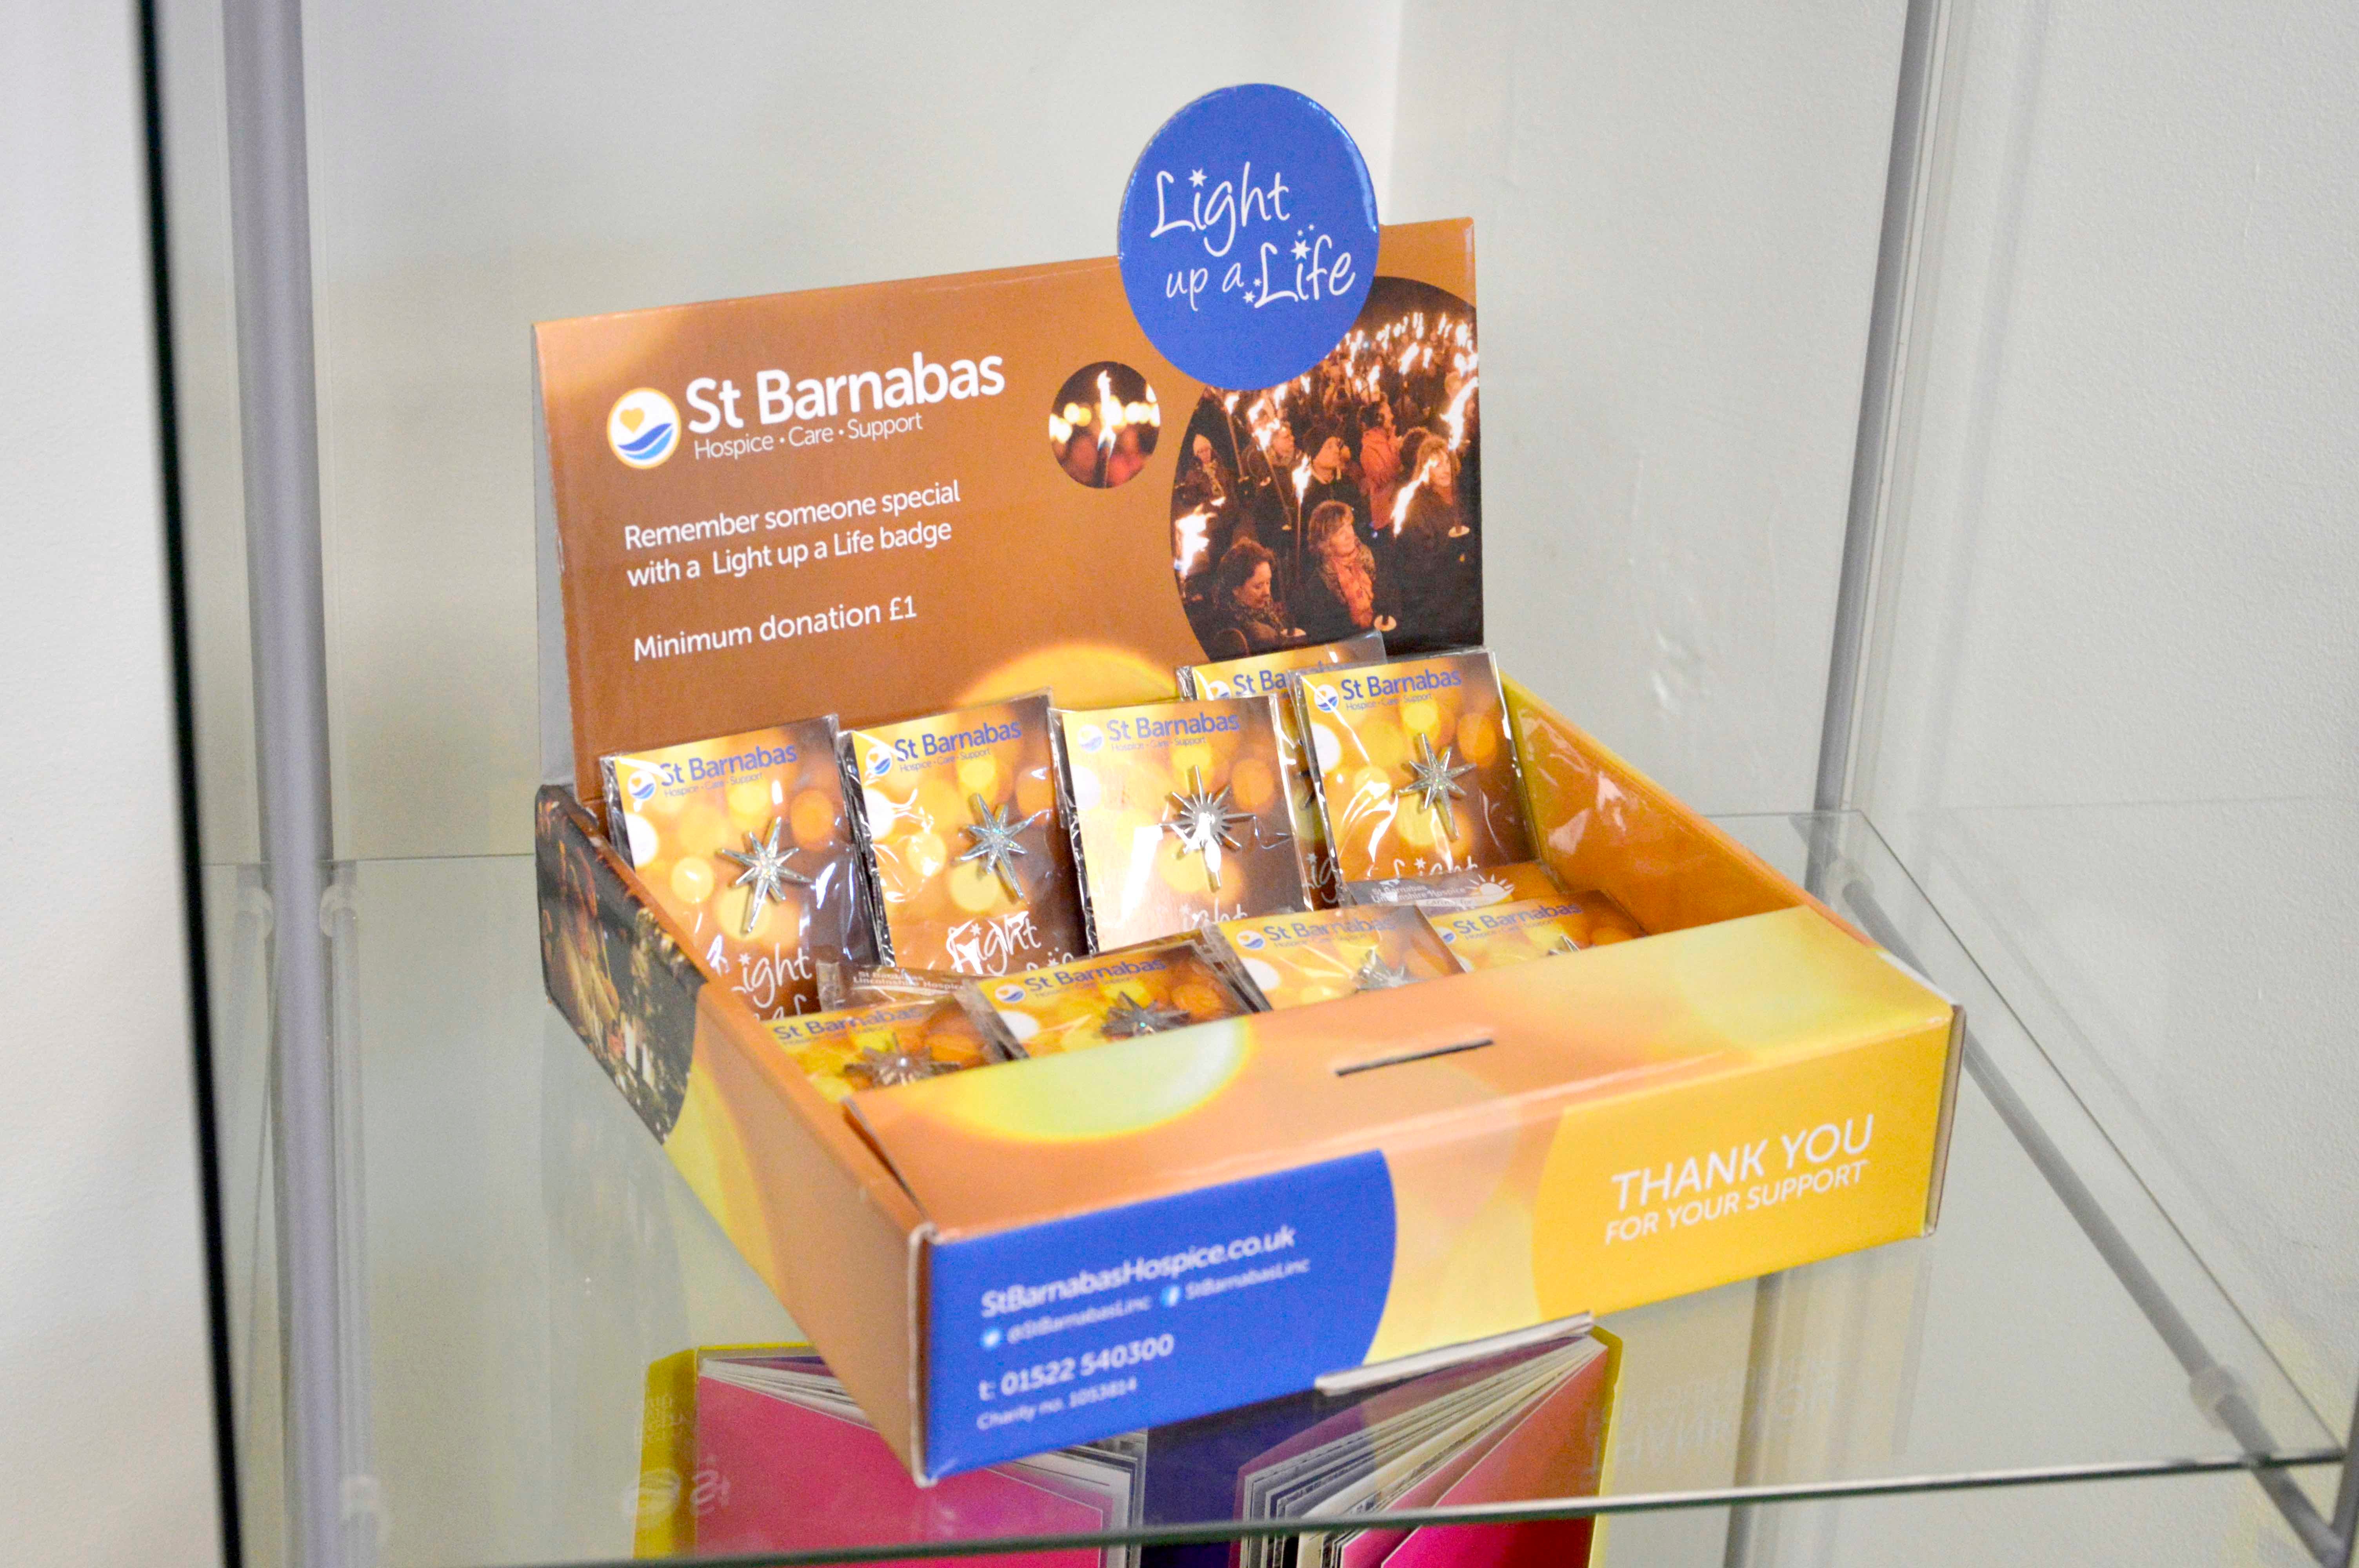 St Barnabas bespoke packaging with donation box